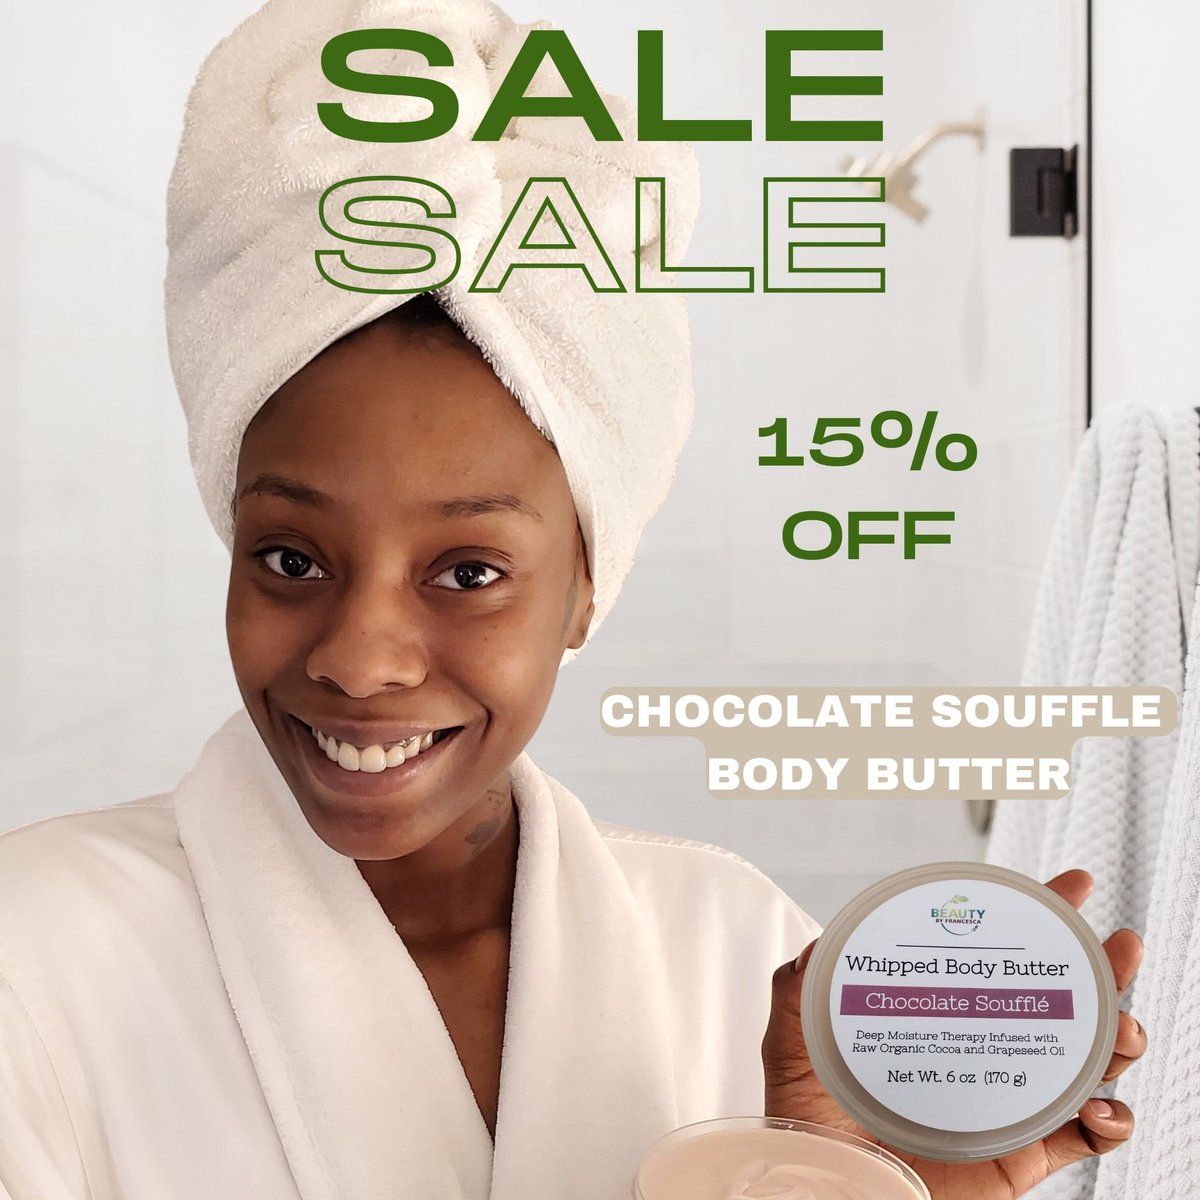 Our #whippedbodybutter made with raw cocoa pampers and nourishes skin.

 #naturallifestyle #nontoxicliving #toxinfreeliving #ecommercebusiness #handmadebusiness #handmadeshop  #standwithsmall #botanicalskincare #crueltyfreeskincare #ethicalbeauty #glowingskincare